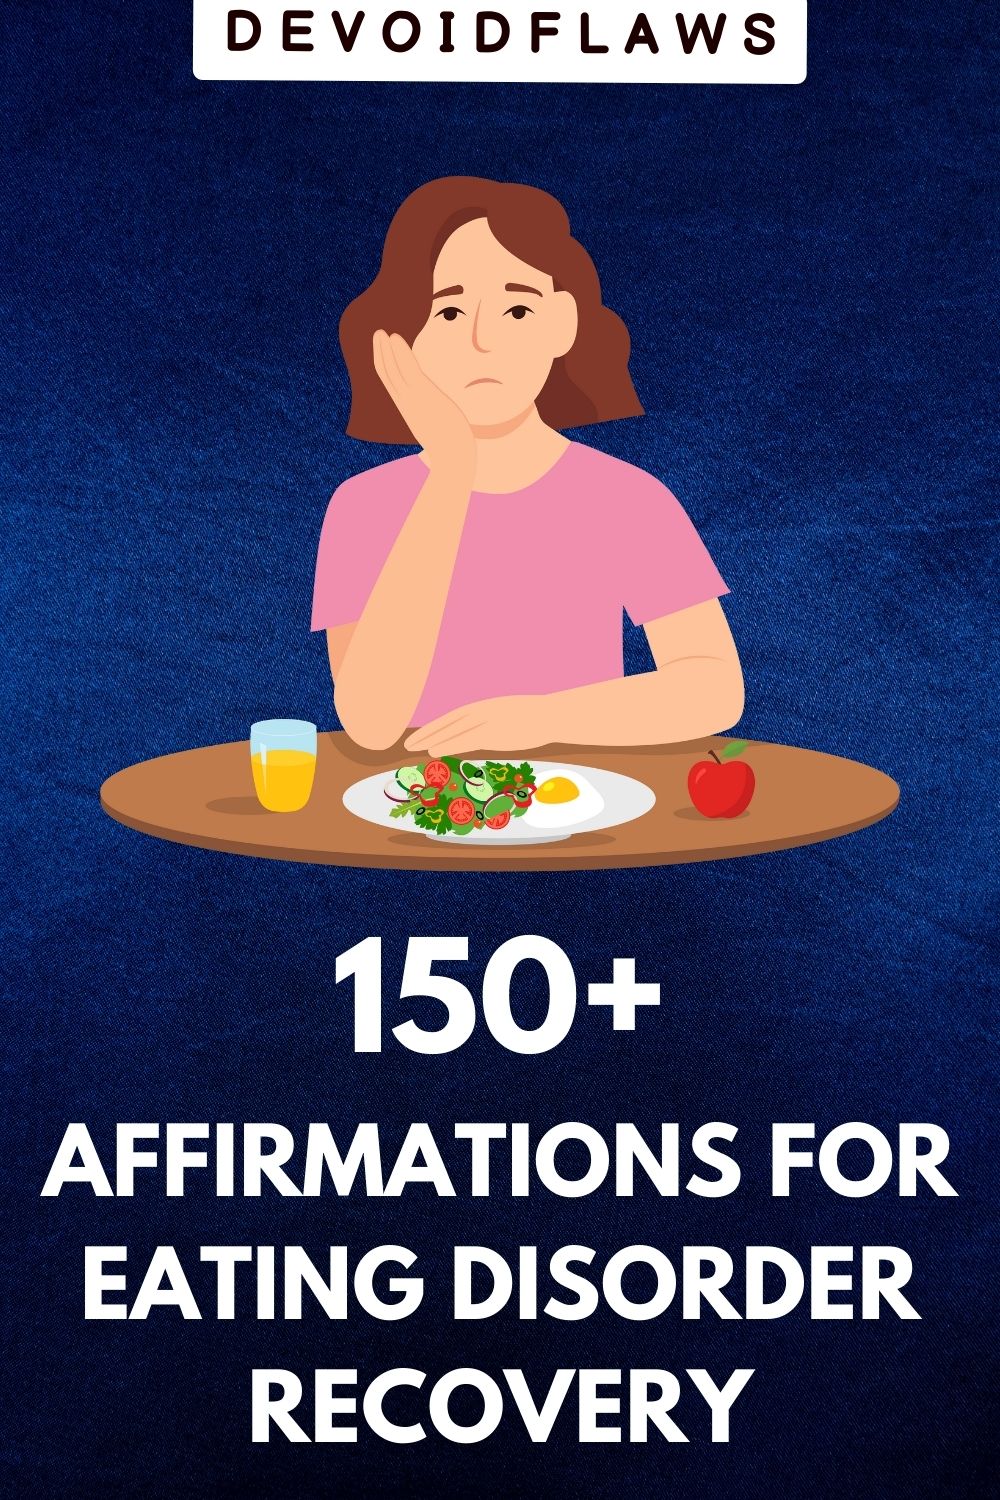 blue background image with text "150+ affirmations for eating disorder recovery"